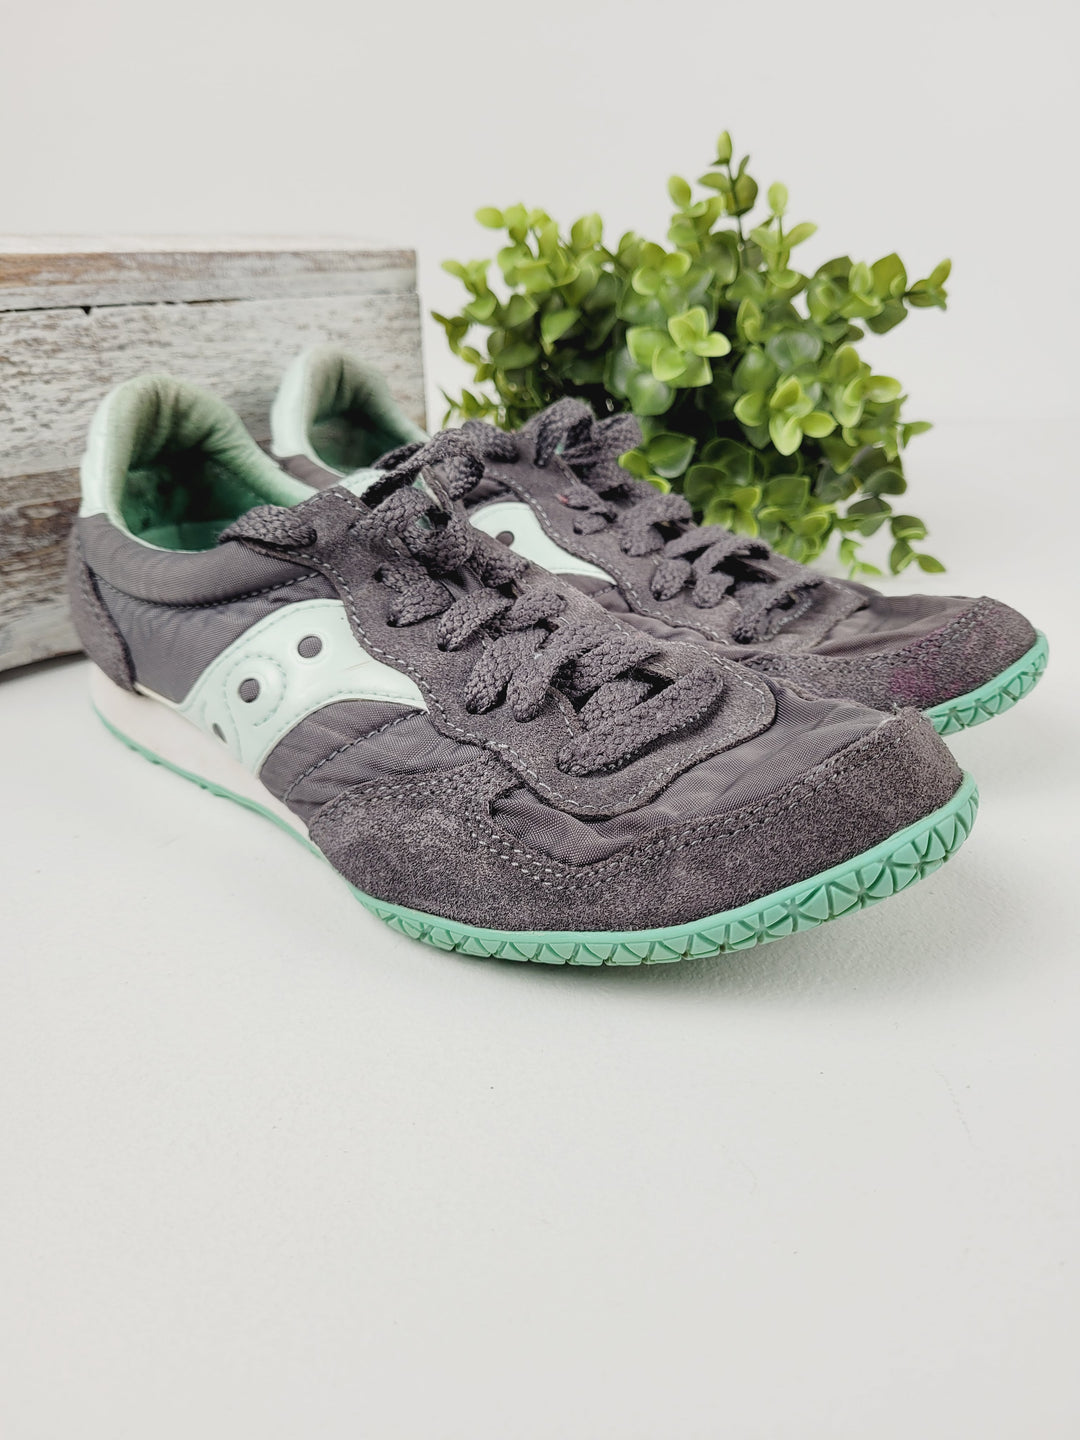 SAUCONY GREY/MINT RUNNING SHOES LADIES SIZE 7 VGUC